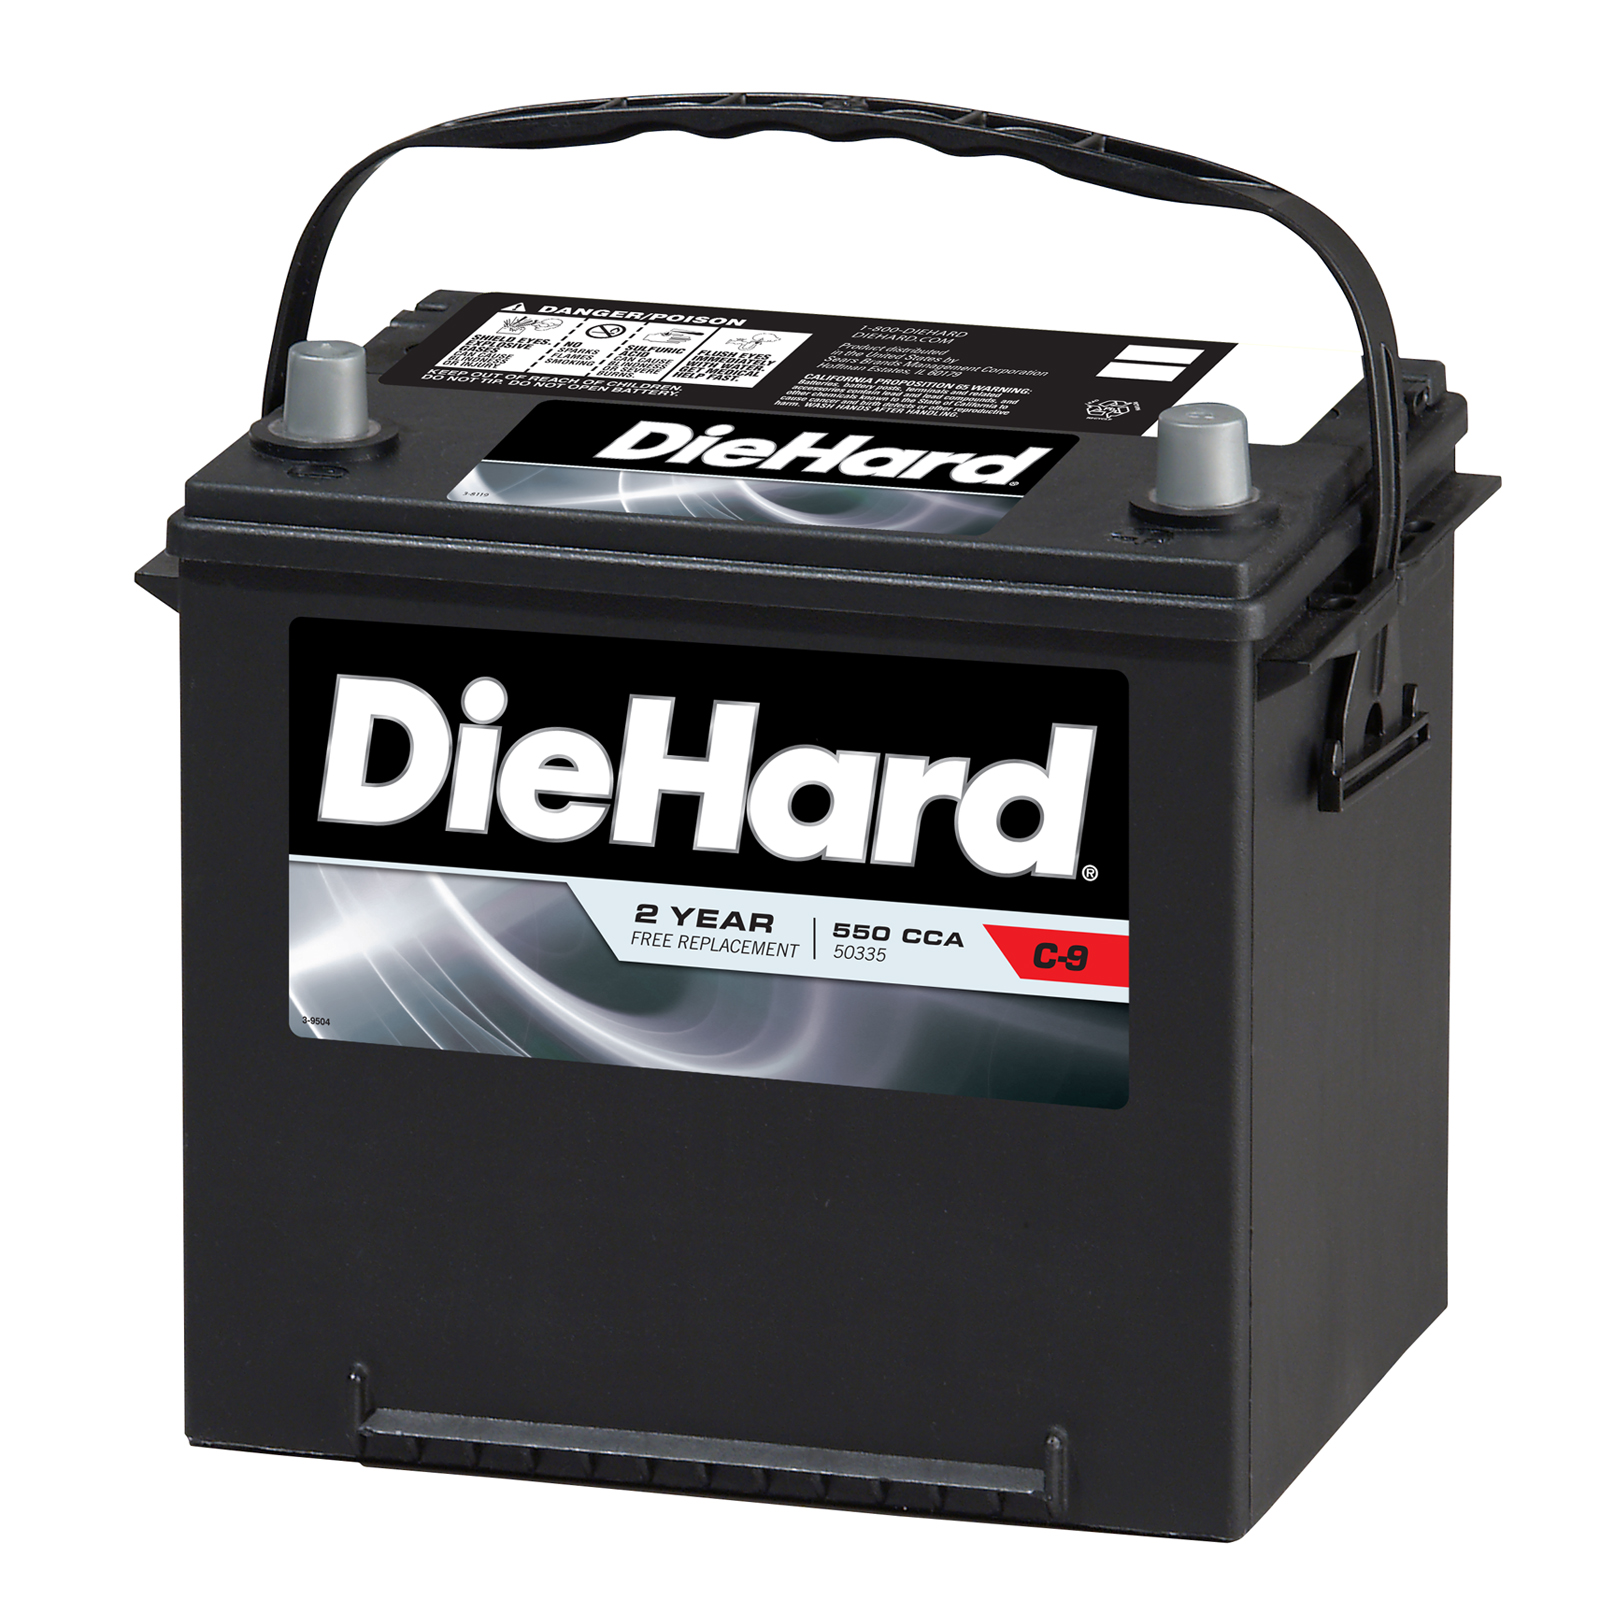 DieHard Automotive Battery - Group Size EP-35 (Price with Exchange)